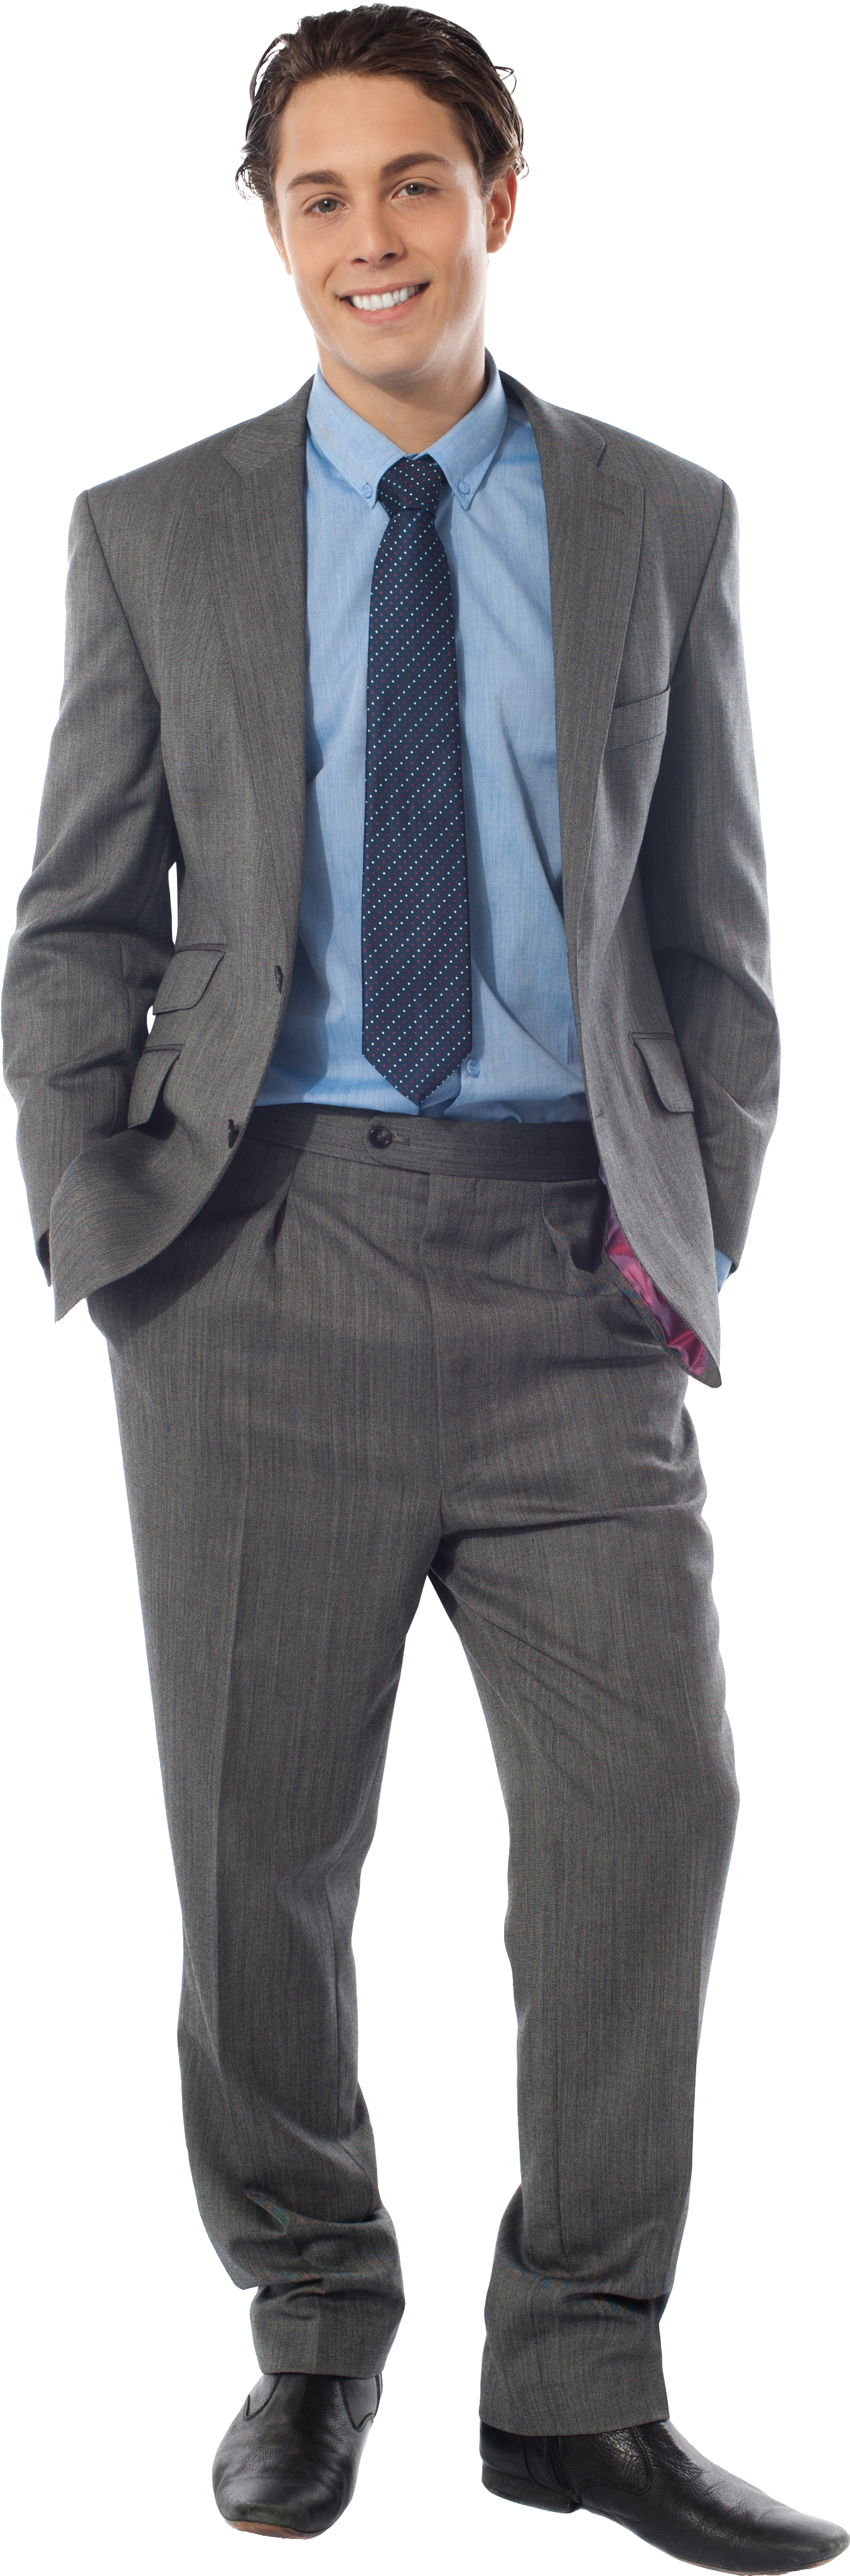 Professional Manin Grey Suit PNG